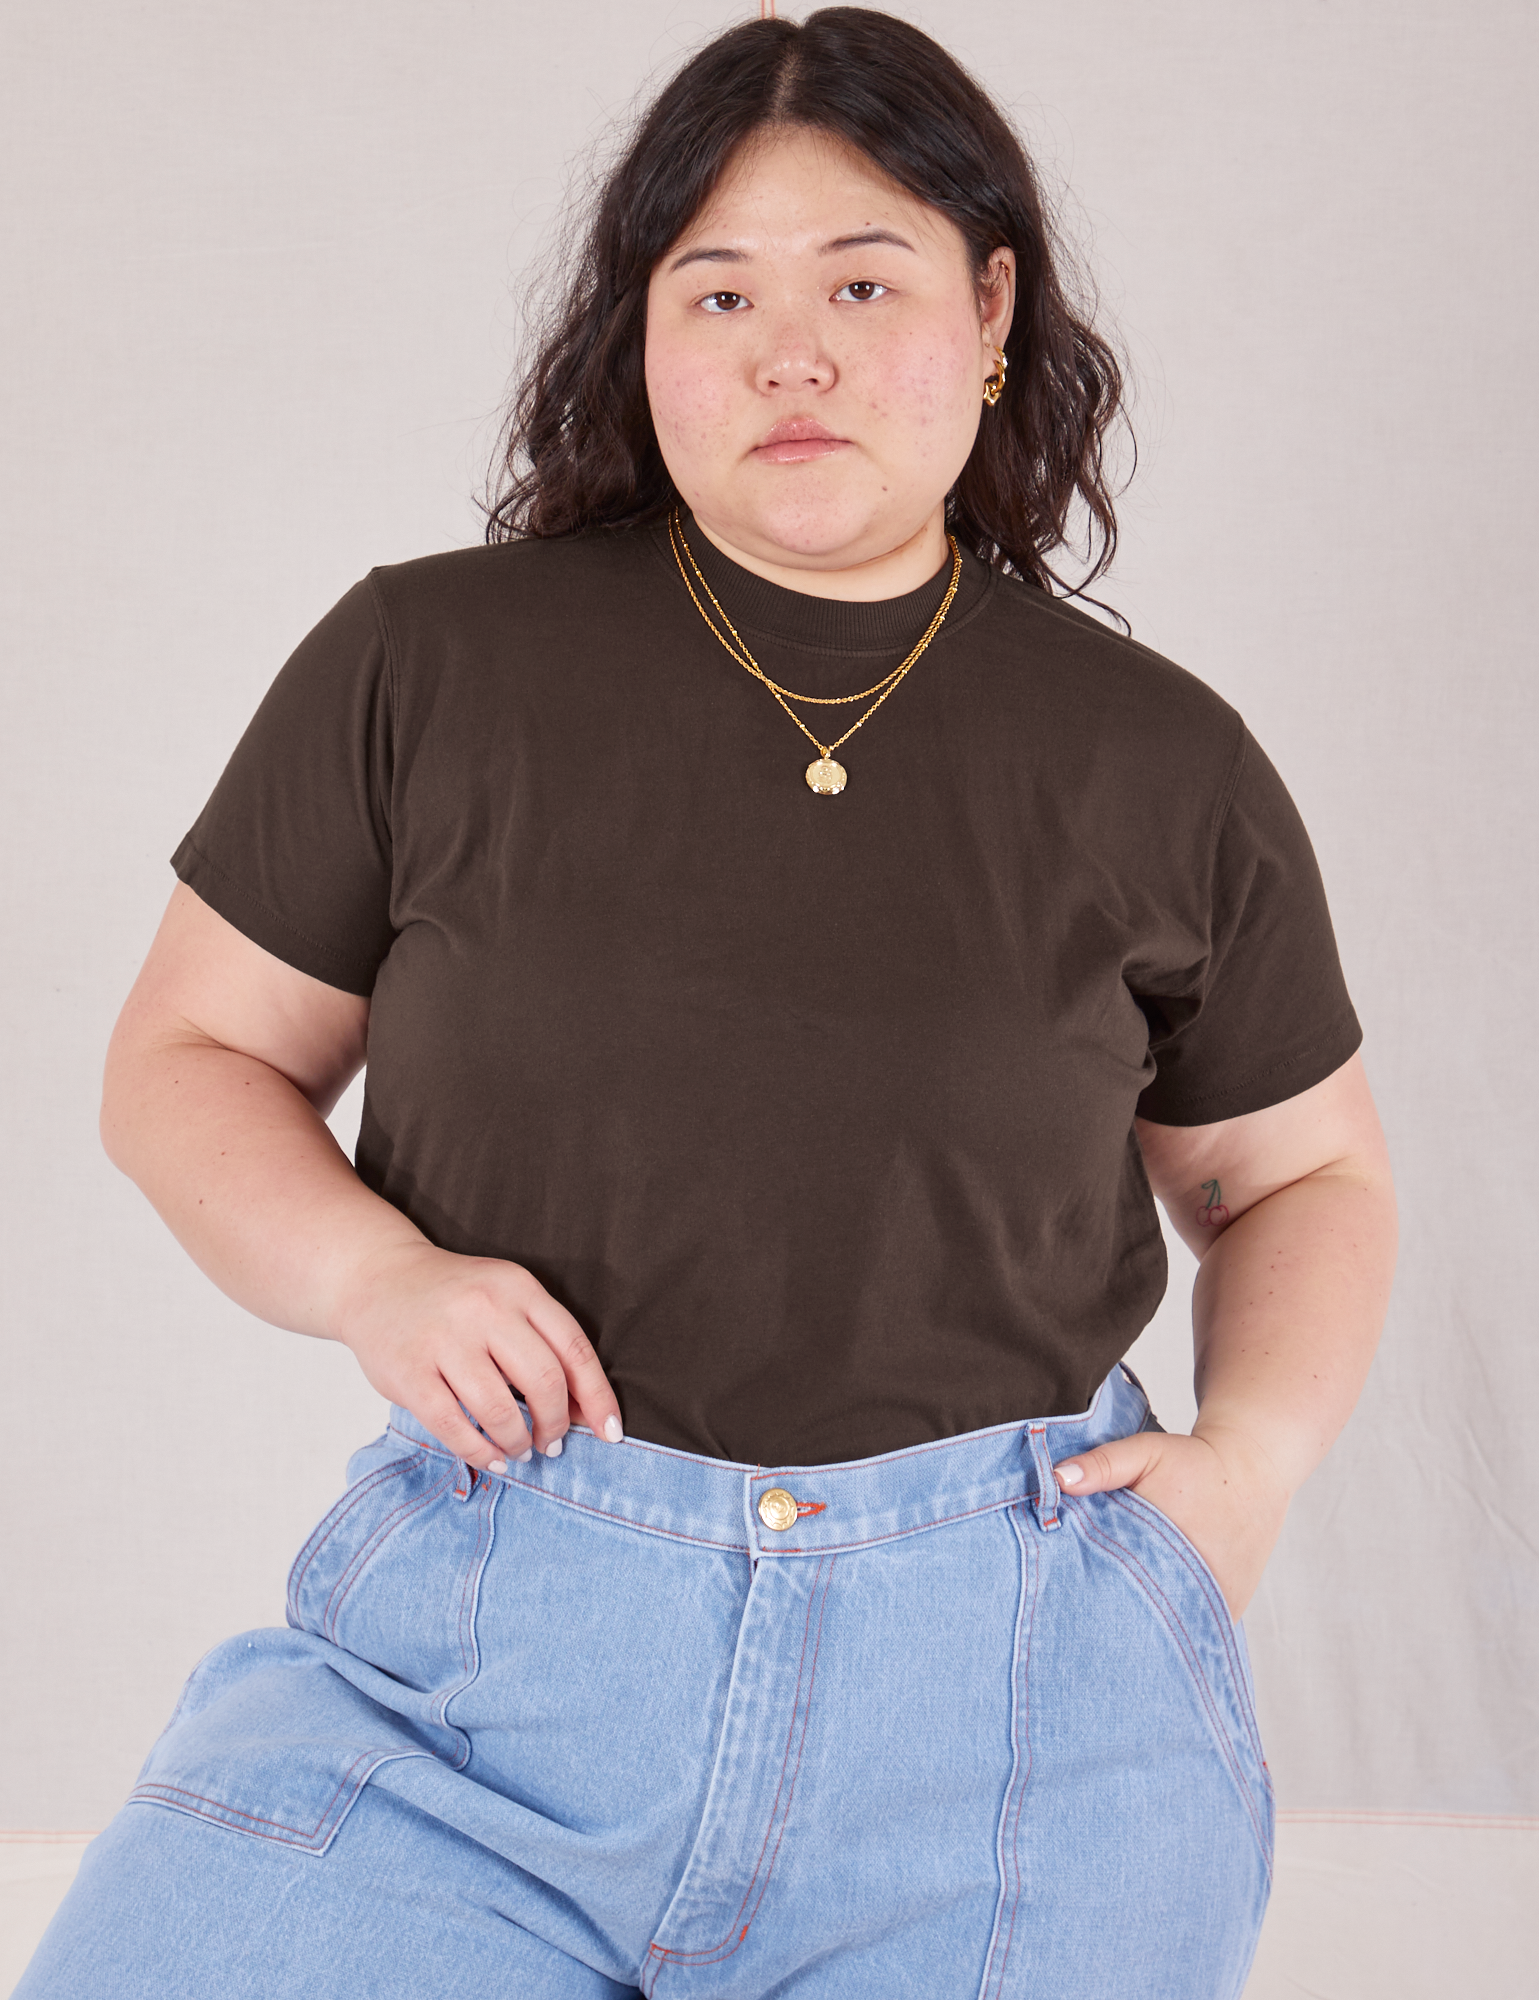 Ashley is 5&#39;7&quot; and wearing L Organic Vintage Tee in Espresso Brown tucked into light wash Carpenter Jeans